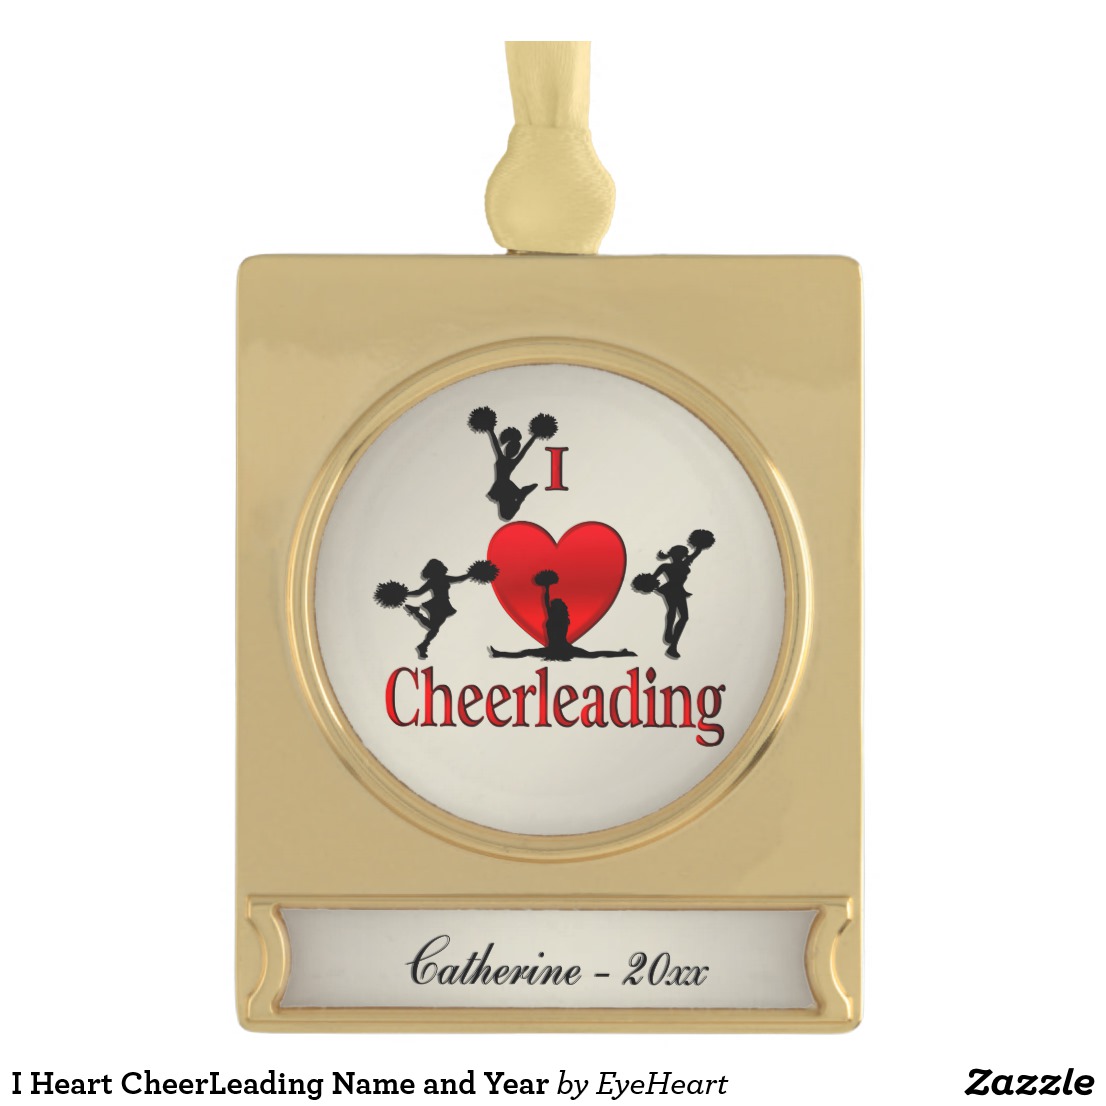 I Heart CheerLeading Name and Year Gold Plated Banner Ornament